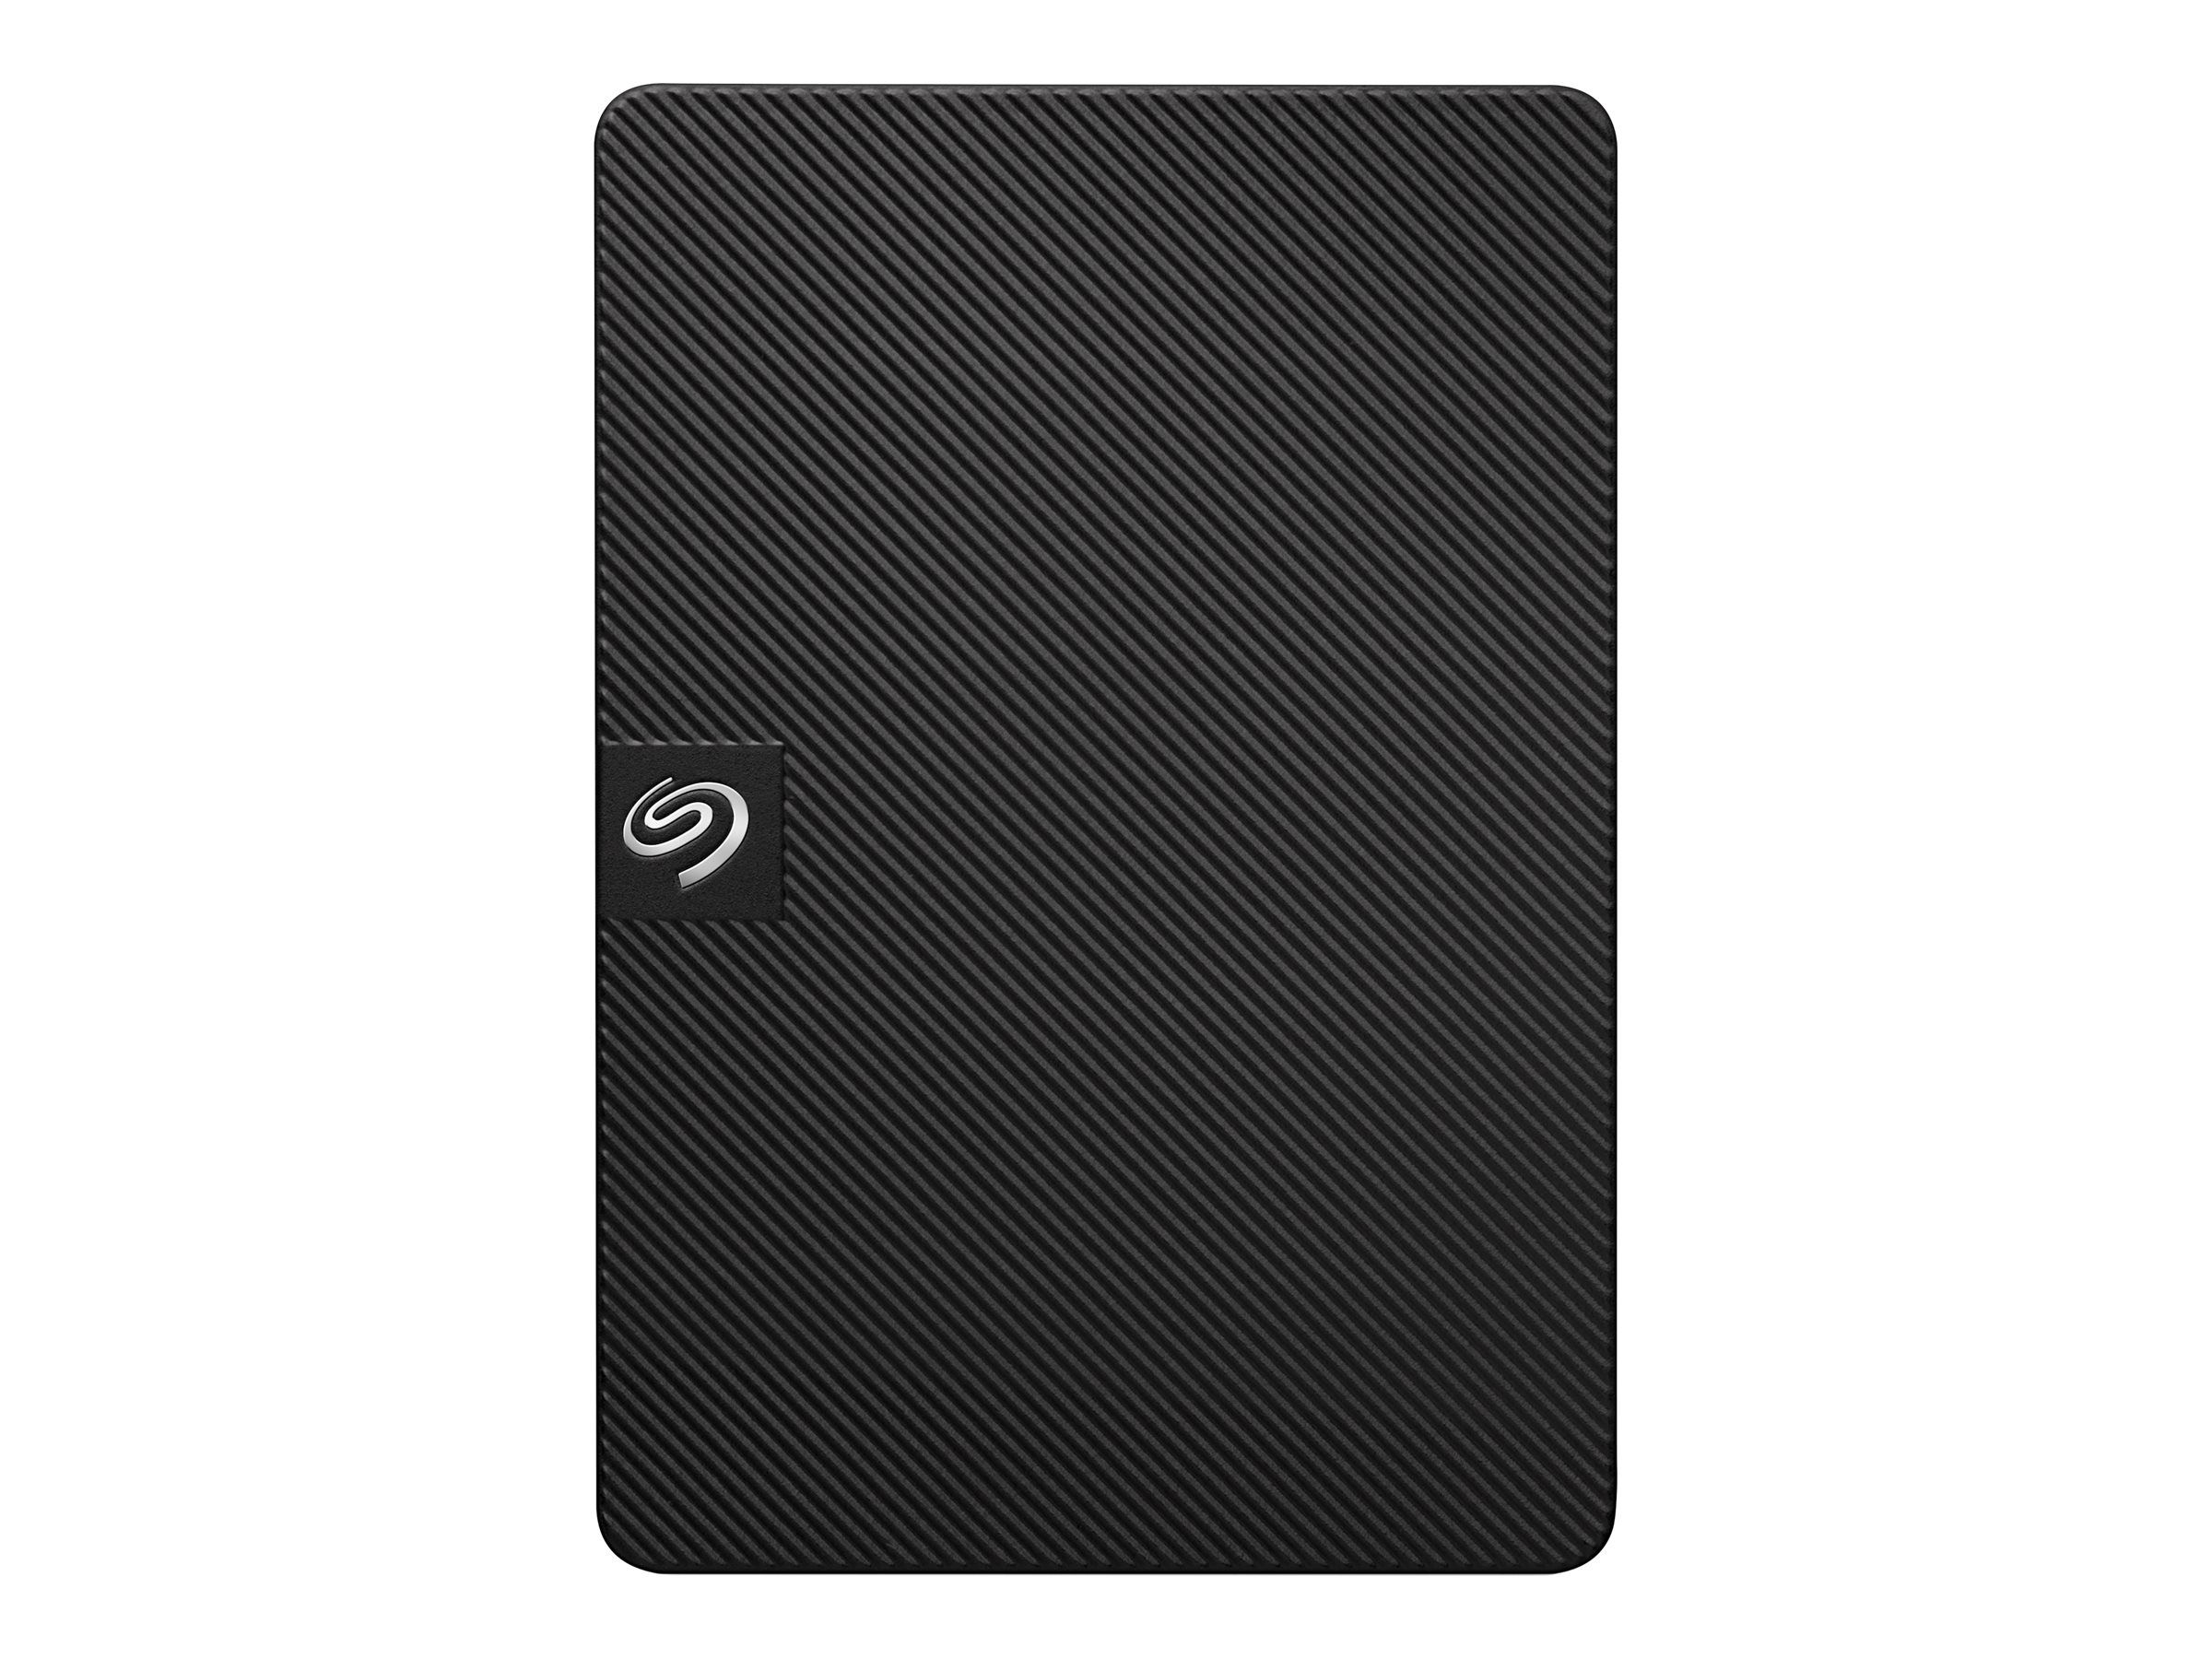 extern Drive 656611551 (tragbar) - Festplatte for 2 Game - Seagate TB | STGD2000200 PS4 -